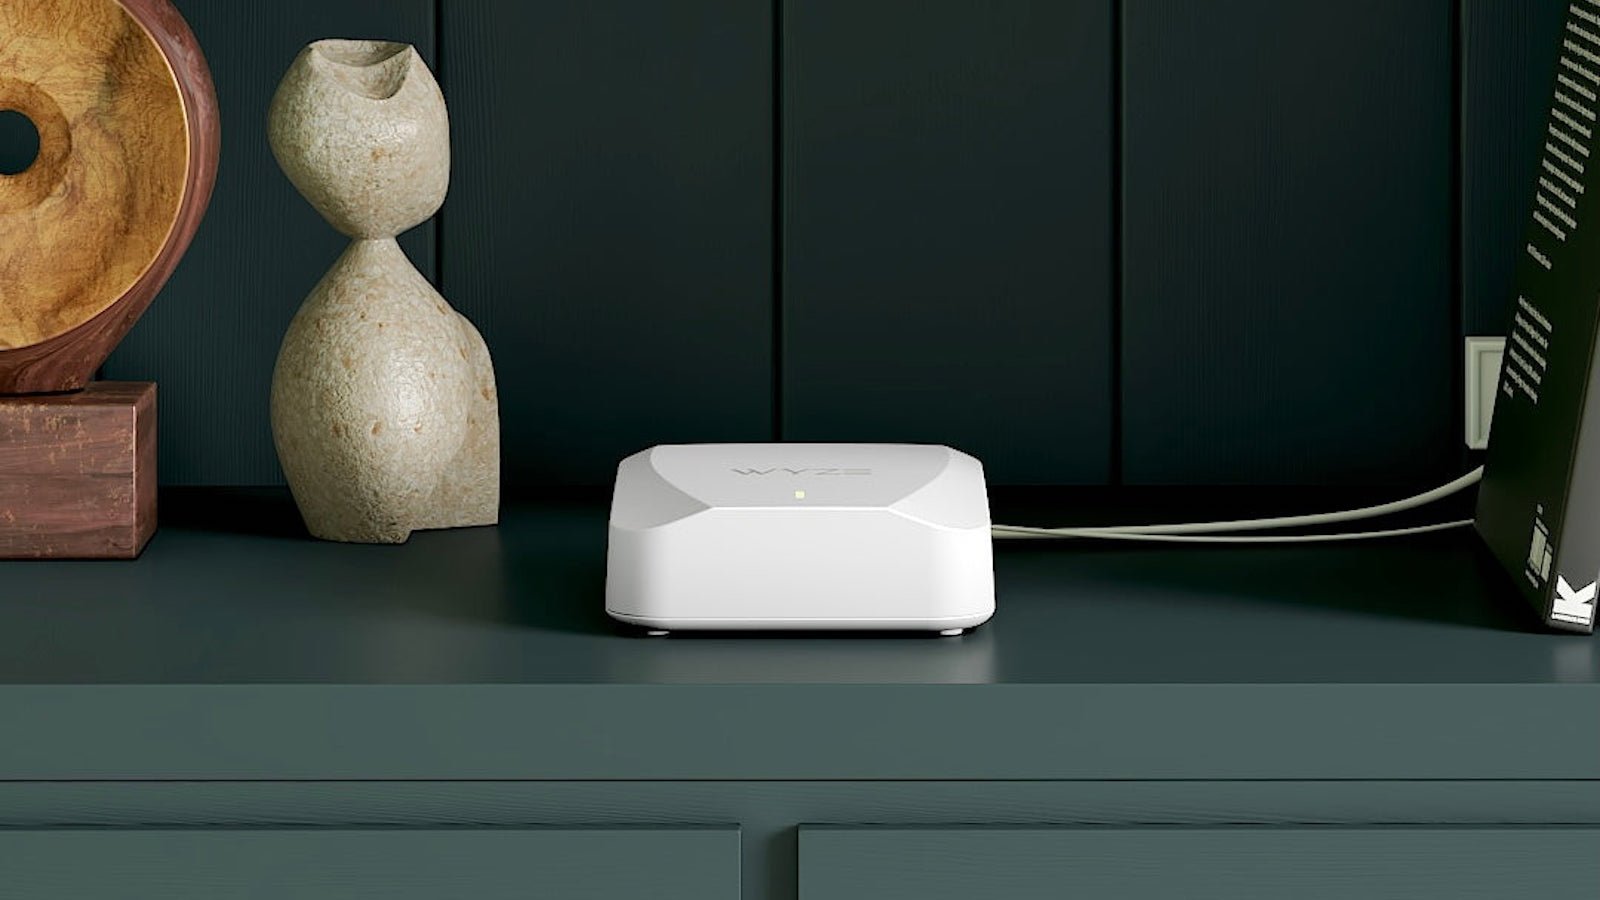 Wyze Wi-Fi 6 Mesh Router diminishes dead internet spots with speeds up to 1 Gbps